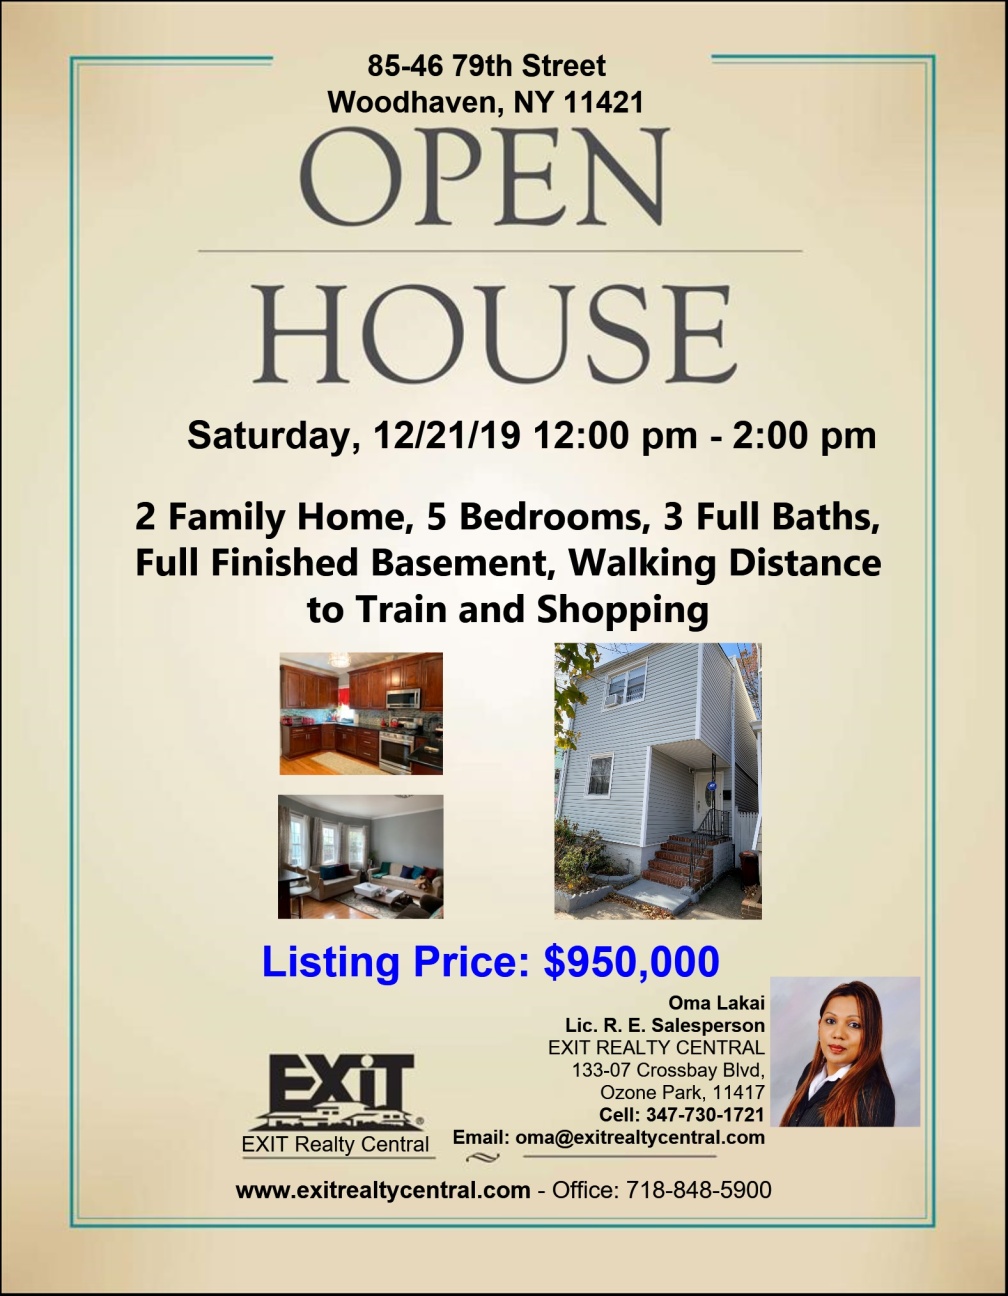 Open House in Ozone Park, 12/21 12-2pm